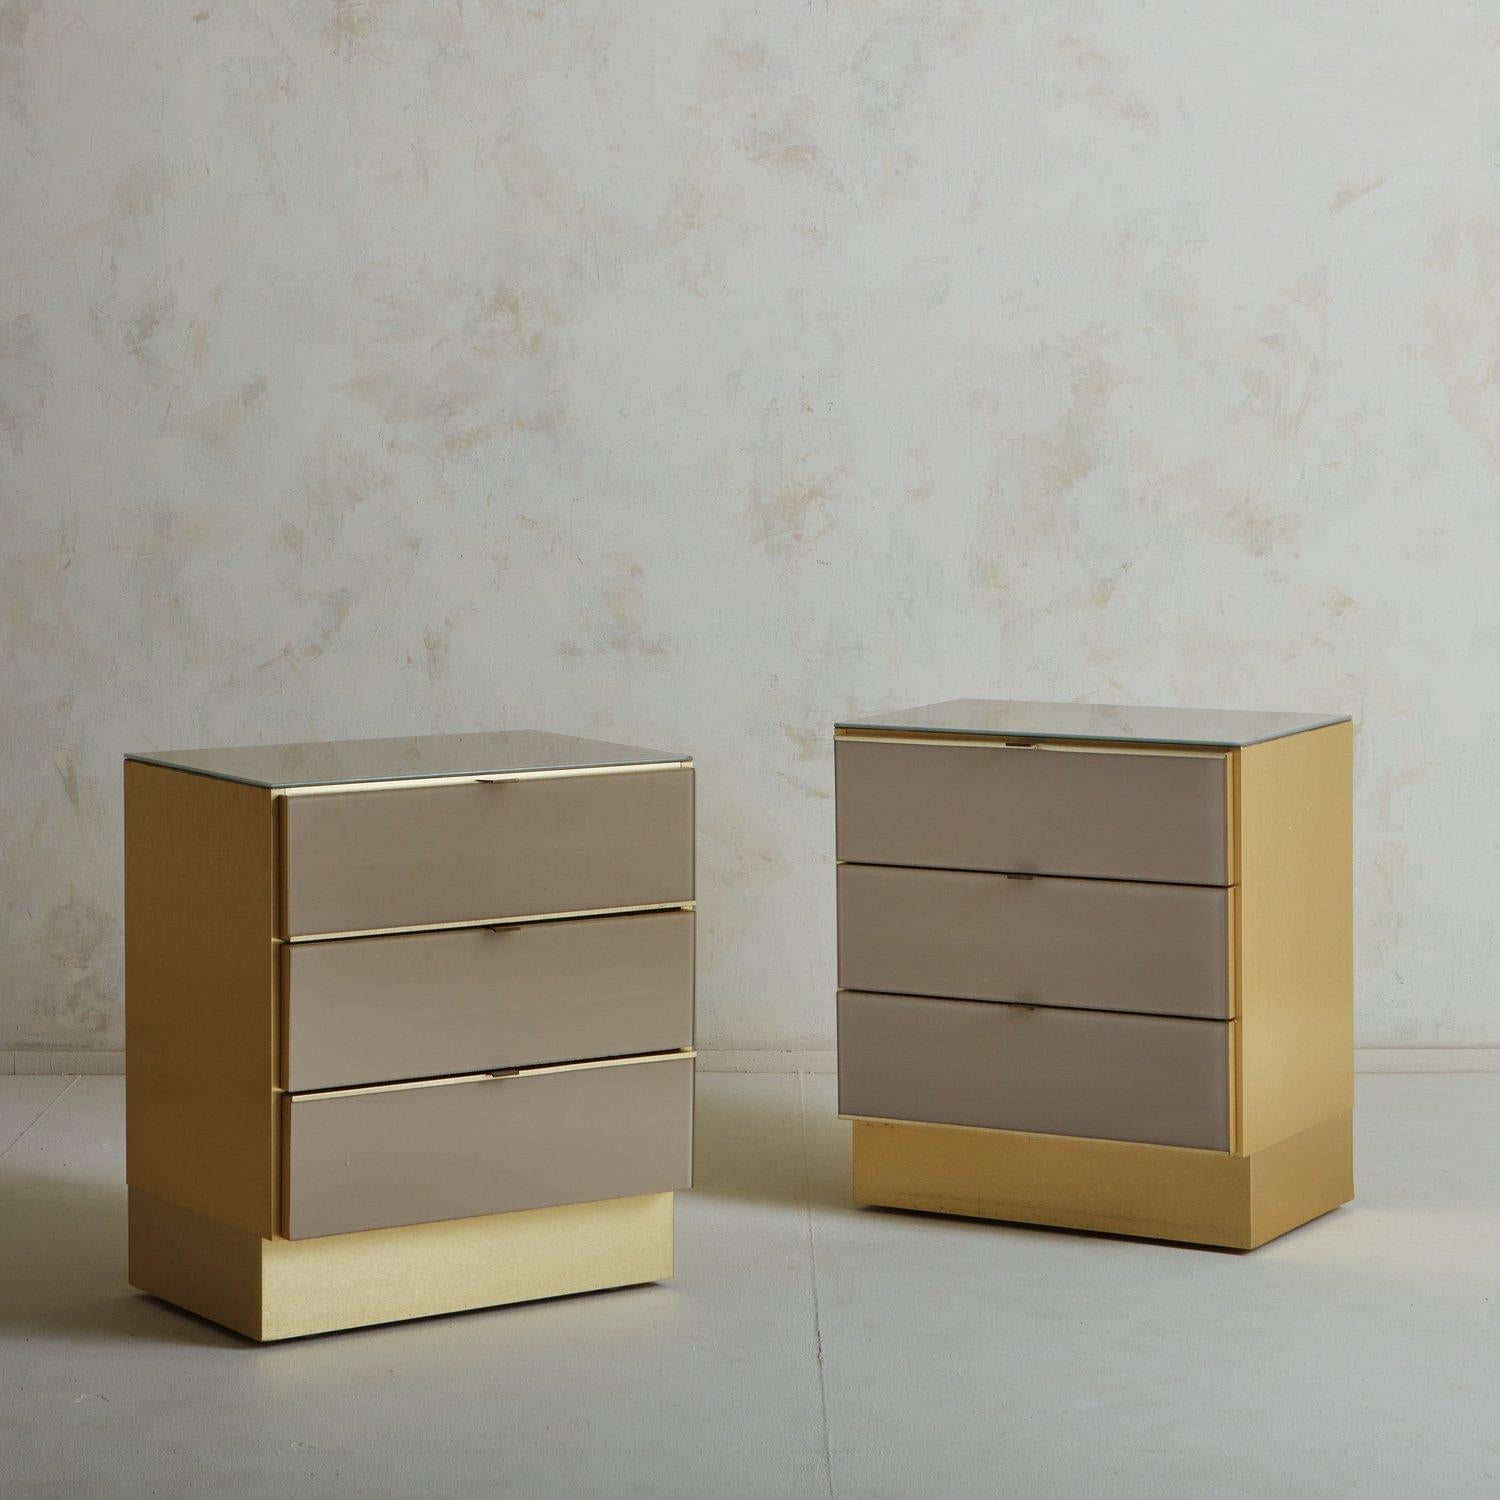 A lovely pair of softly hued back painted glass nightstands by Ello International. These nightstands feature brushed brass along the sides and recessed plinth base, while the back painted glass wraps the three drawer fronts and dresser top. They